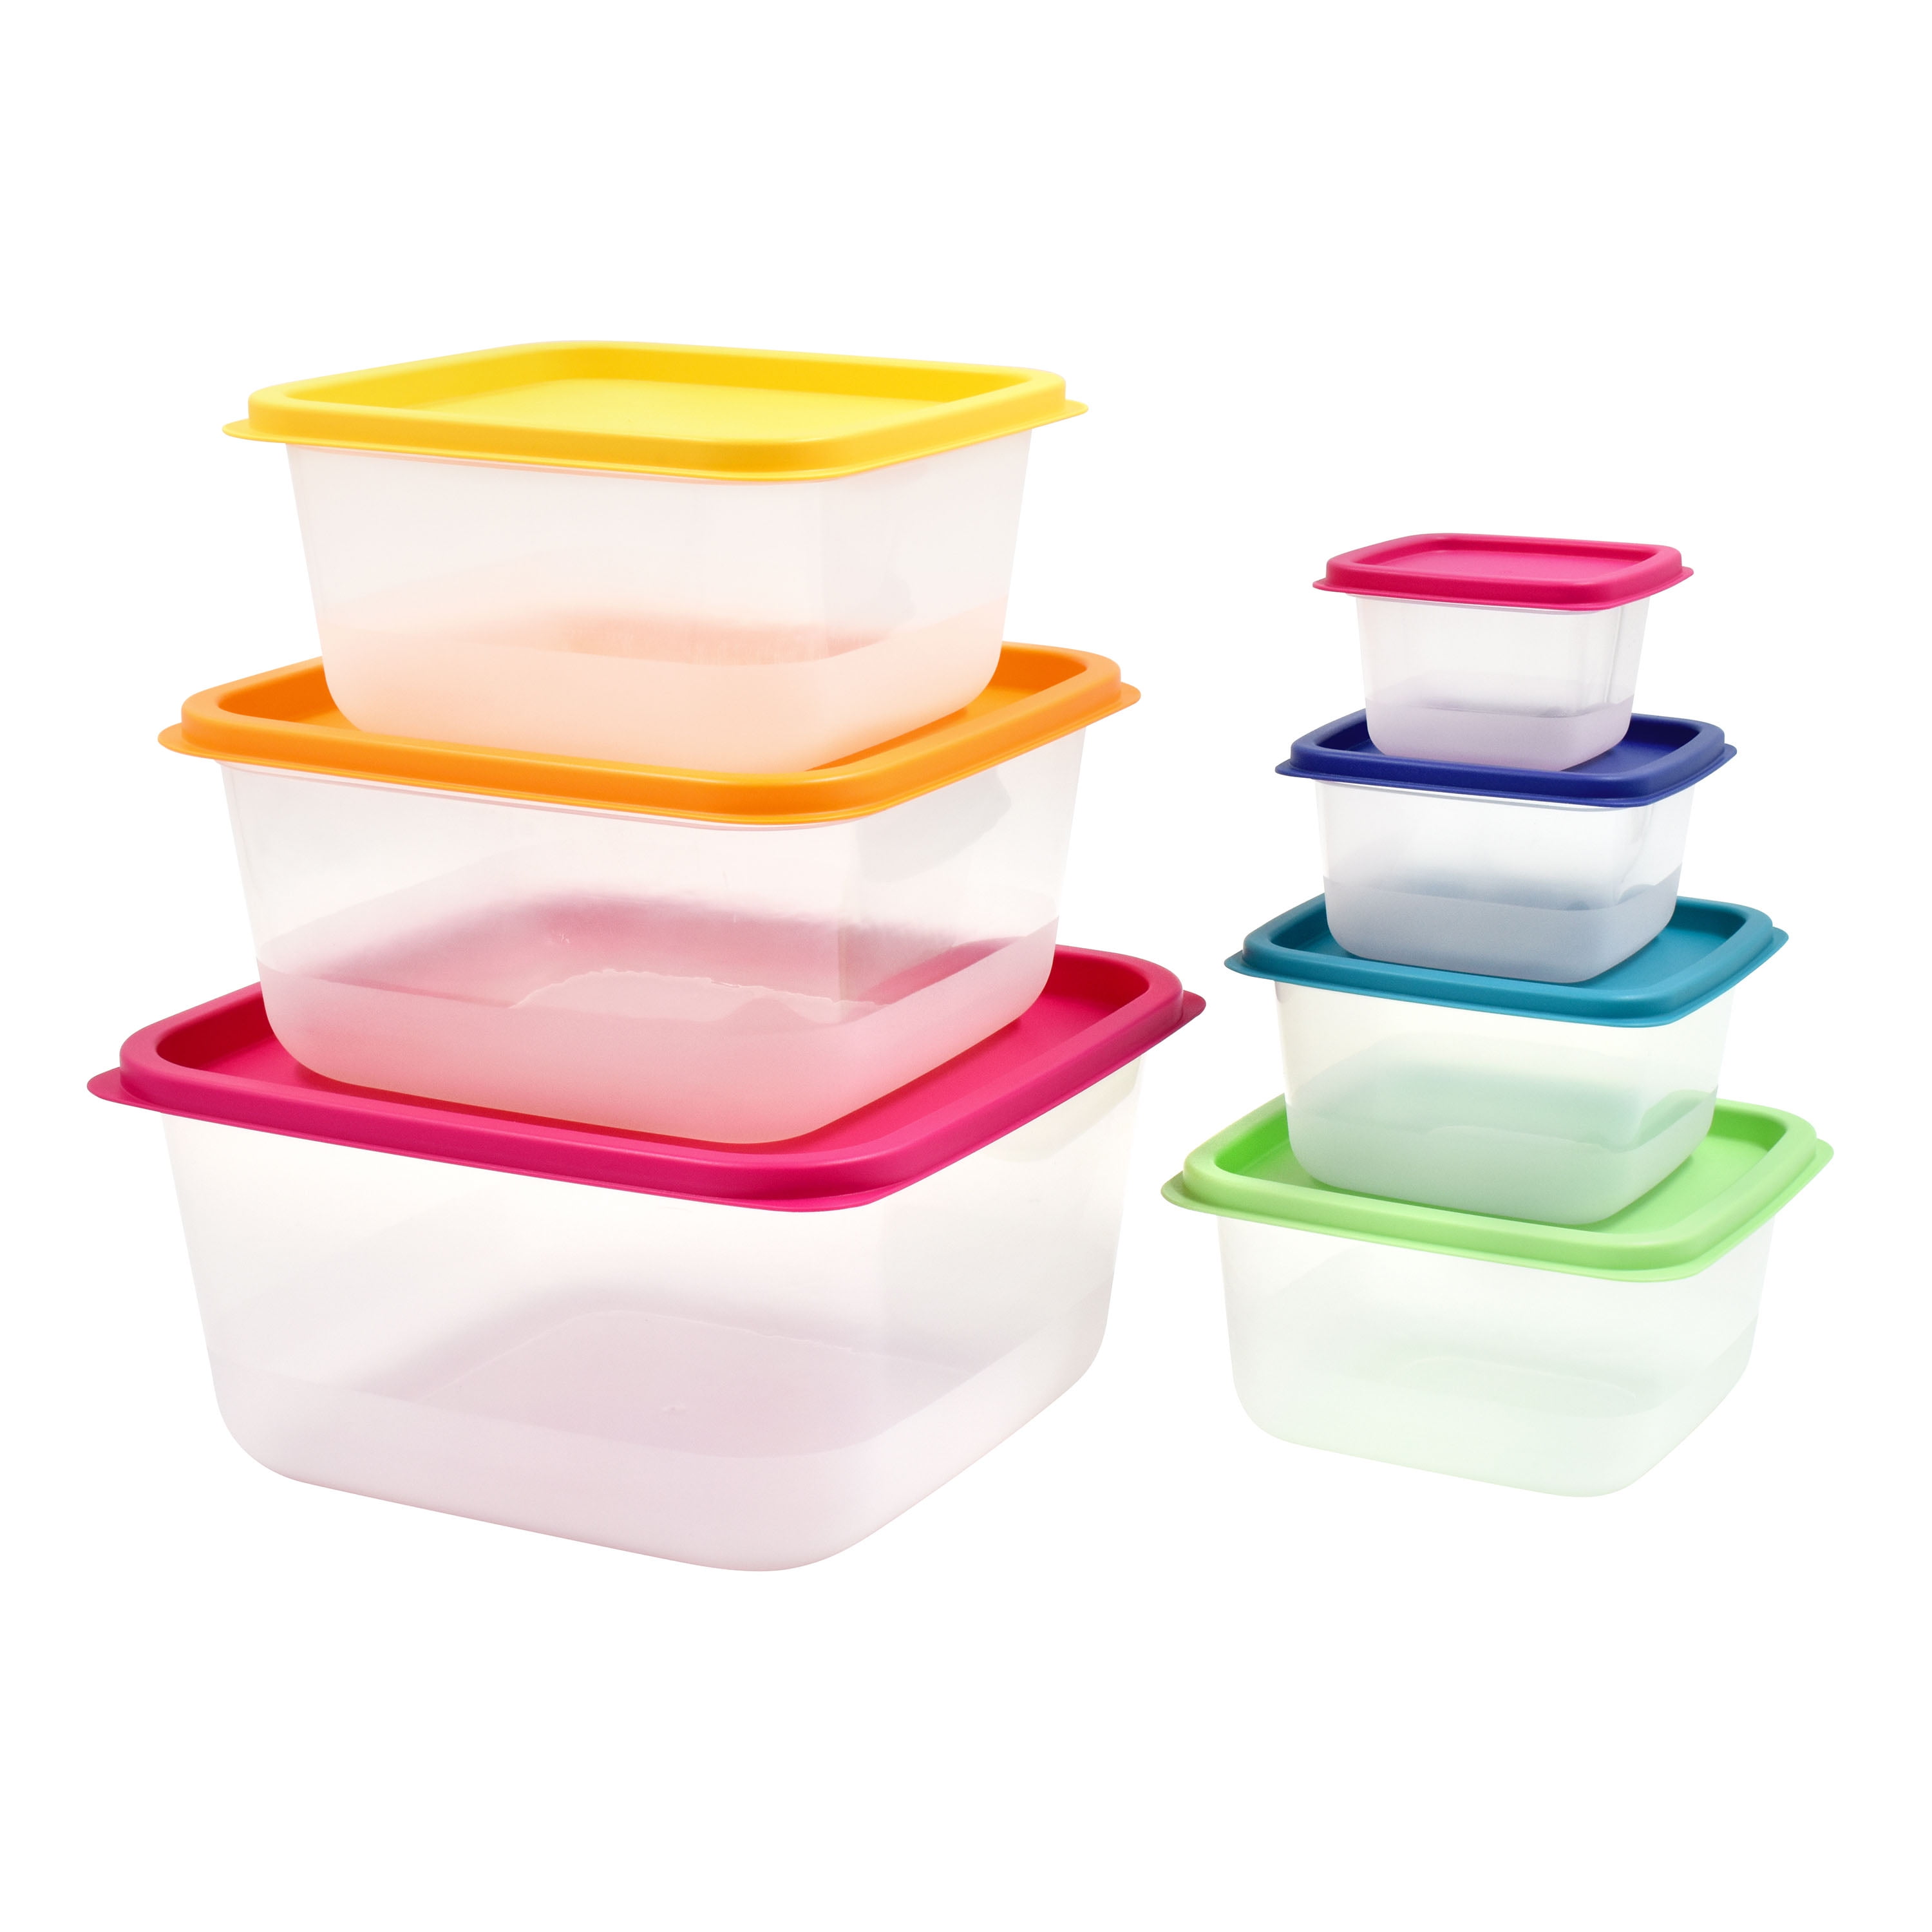 Glad for Kids Gladware Variety Pack 26ct Back to School Pattern Food Storage Containers with Lids | Mixed Sizes Kids Food Containers with Rainbows 